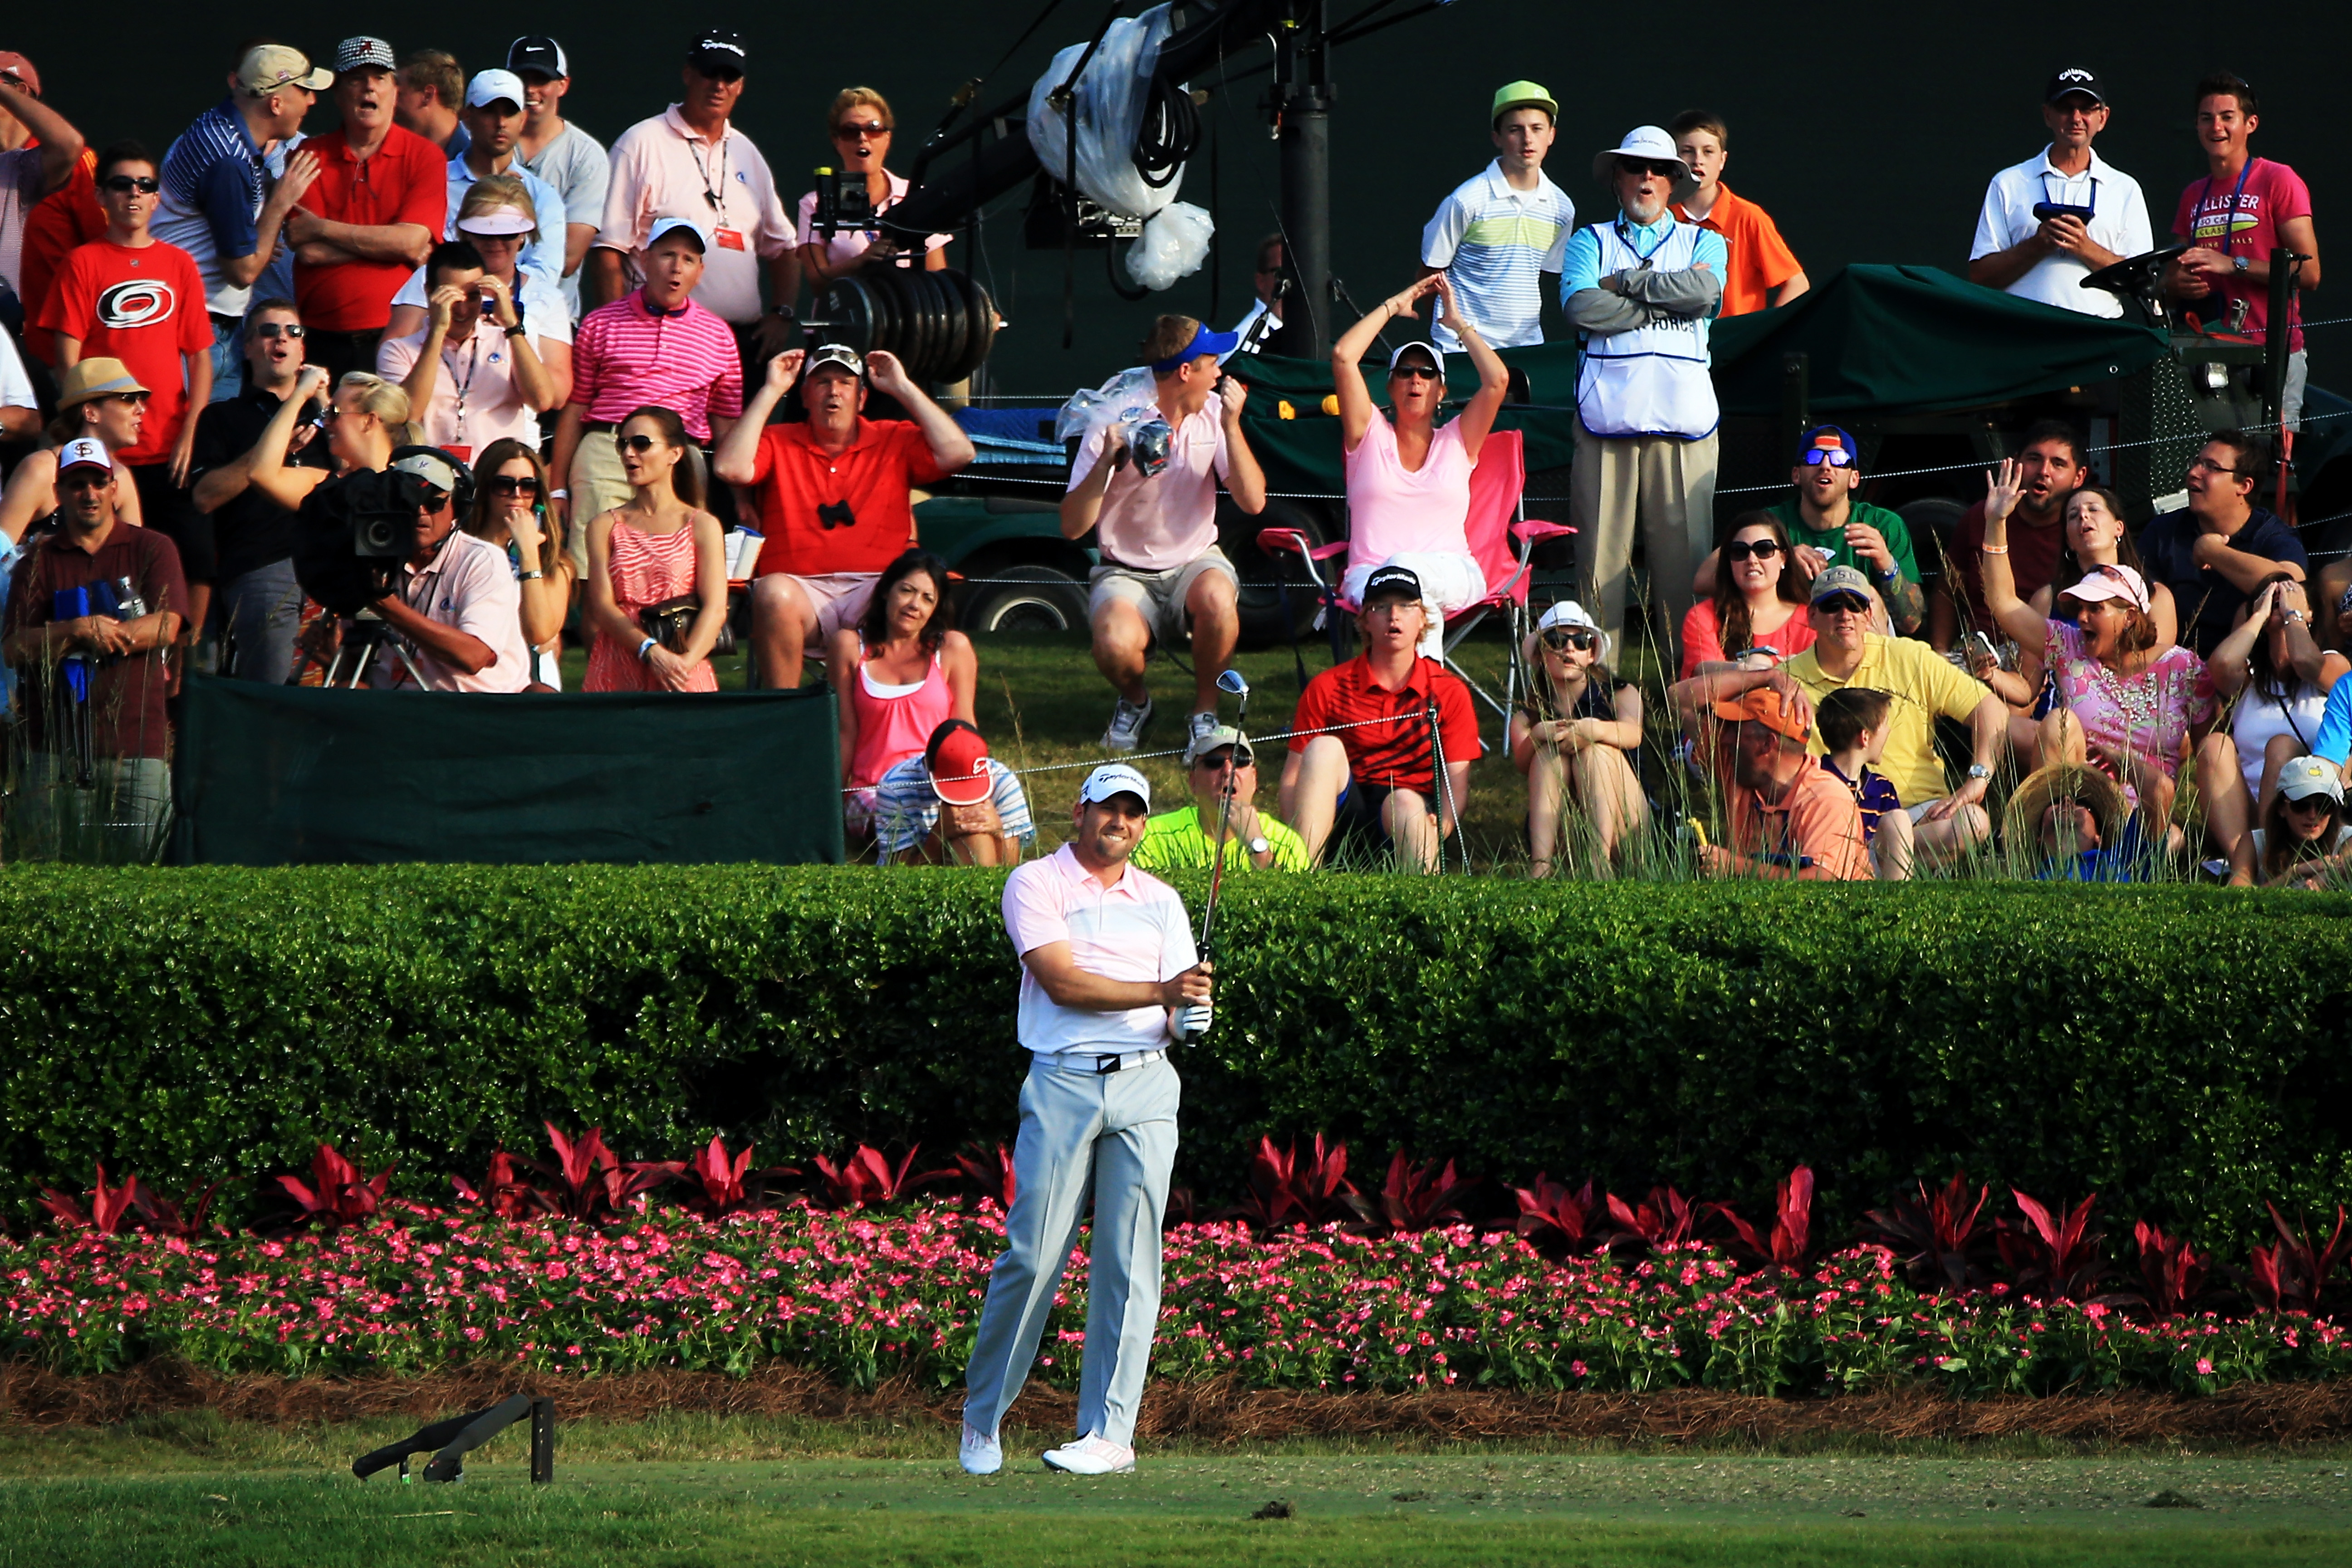 Players Championship 18 The 10 Biggest Meltdowns At Tpc Sawgrass This Is The Loop Golf Digest